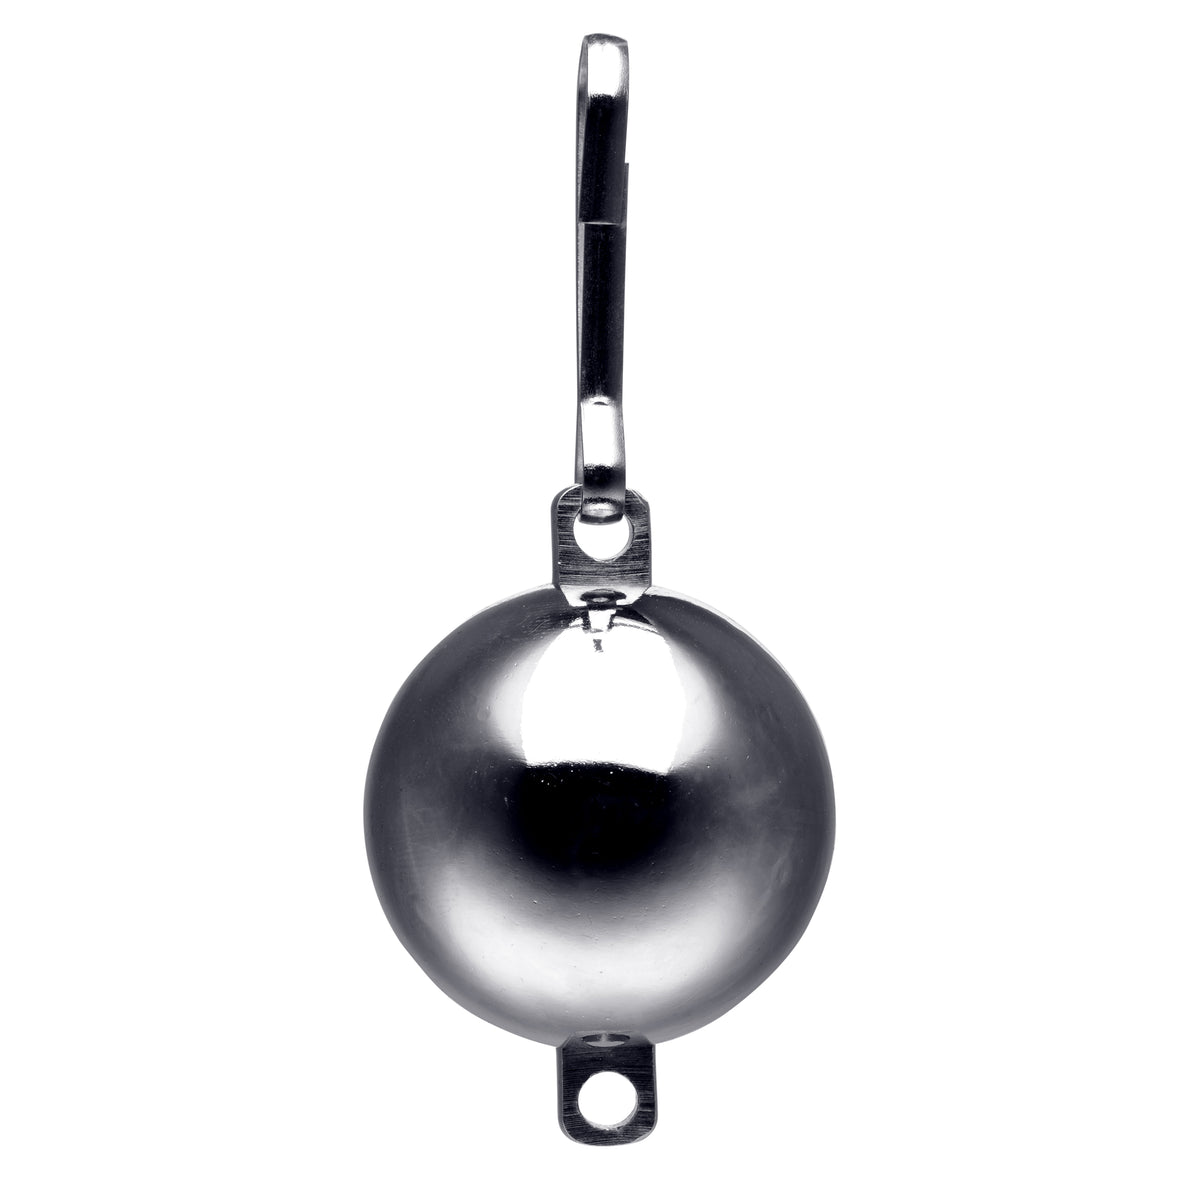 Oppressor’s Orb 8 Oz Ball Weight with Connection Point